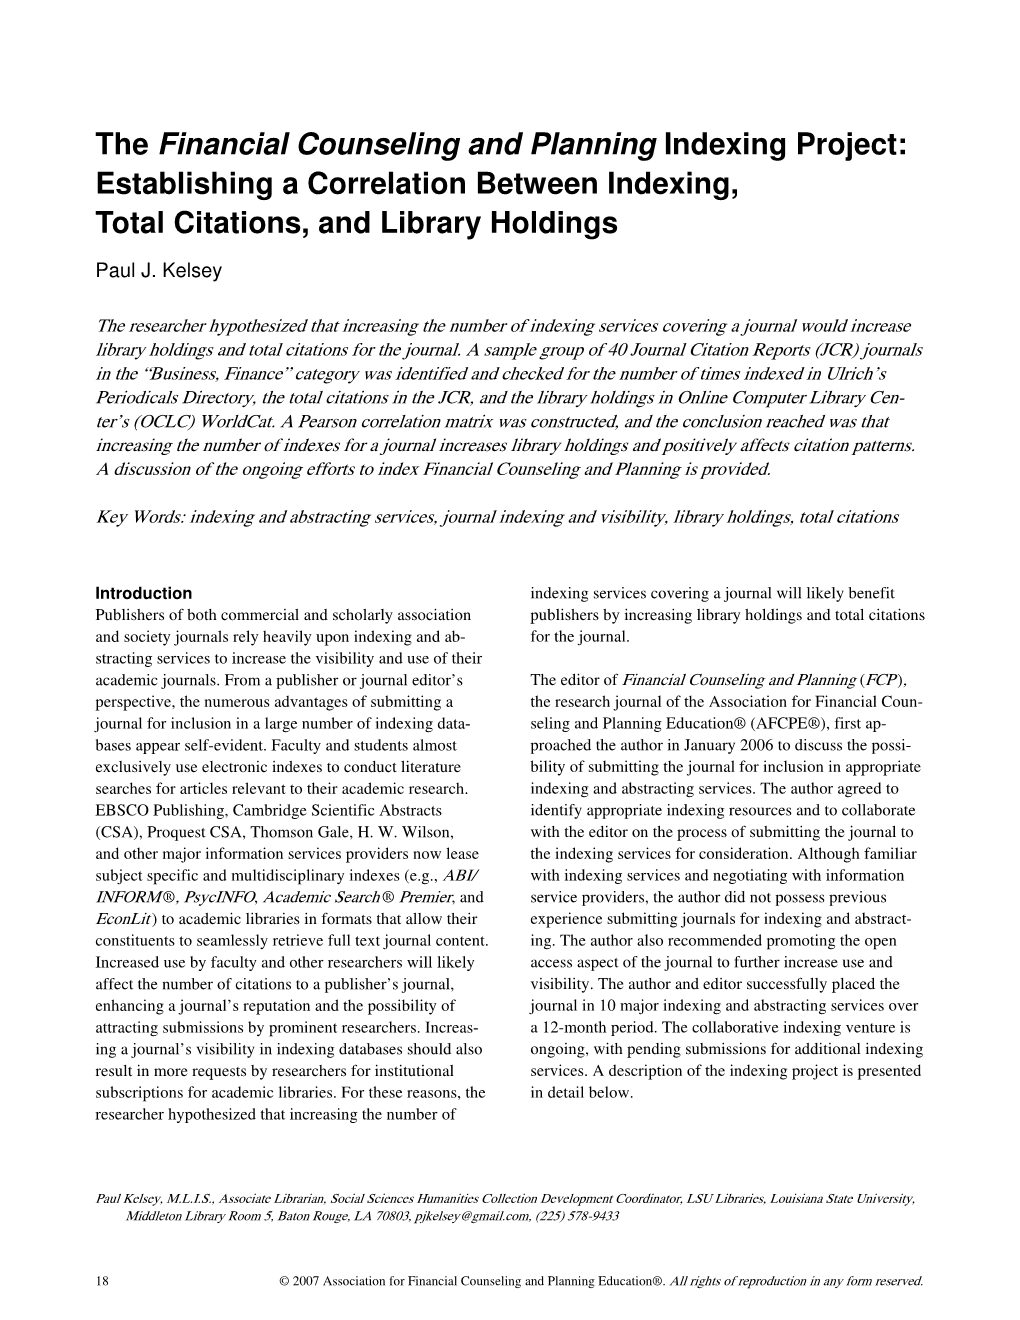 Financial Counseling and Planning Indexing Project: Establishing a Correlation Between Indexing, Total Citations, and Library Holdings